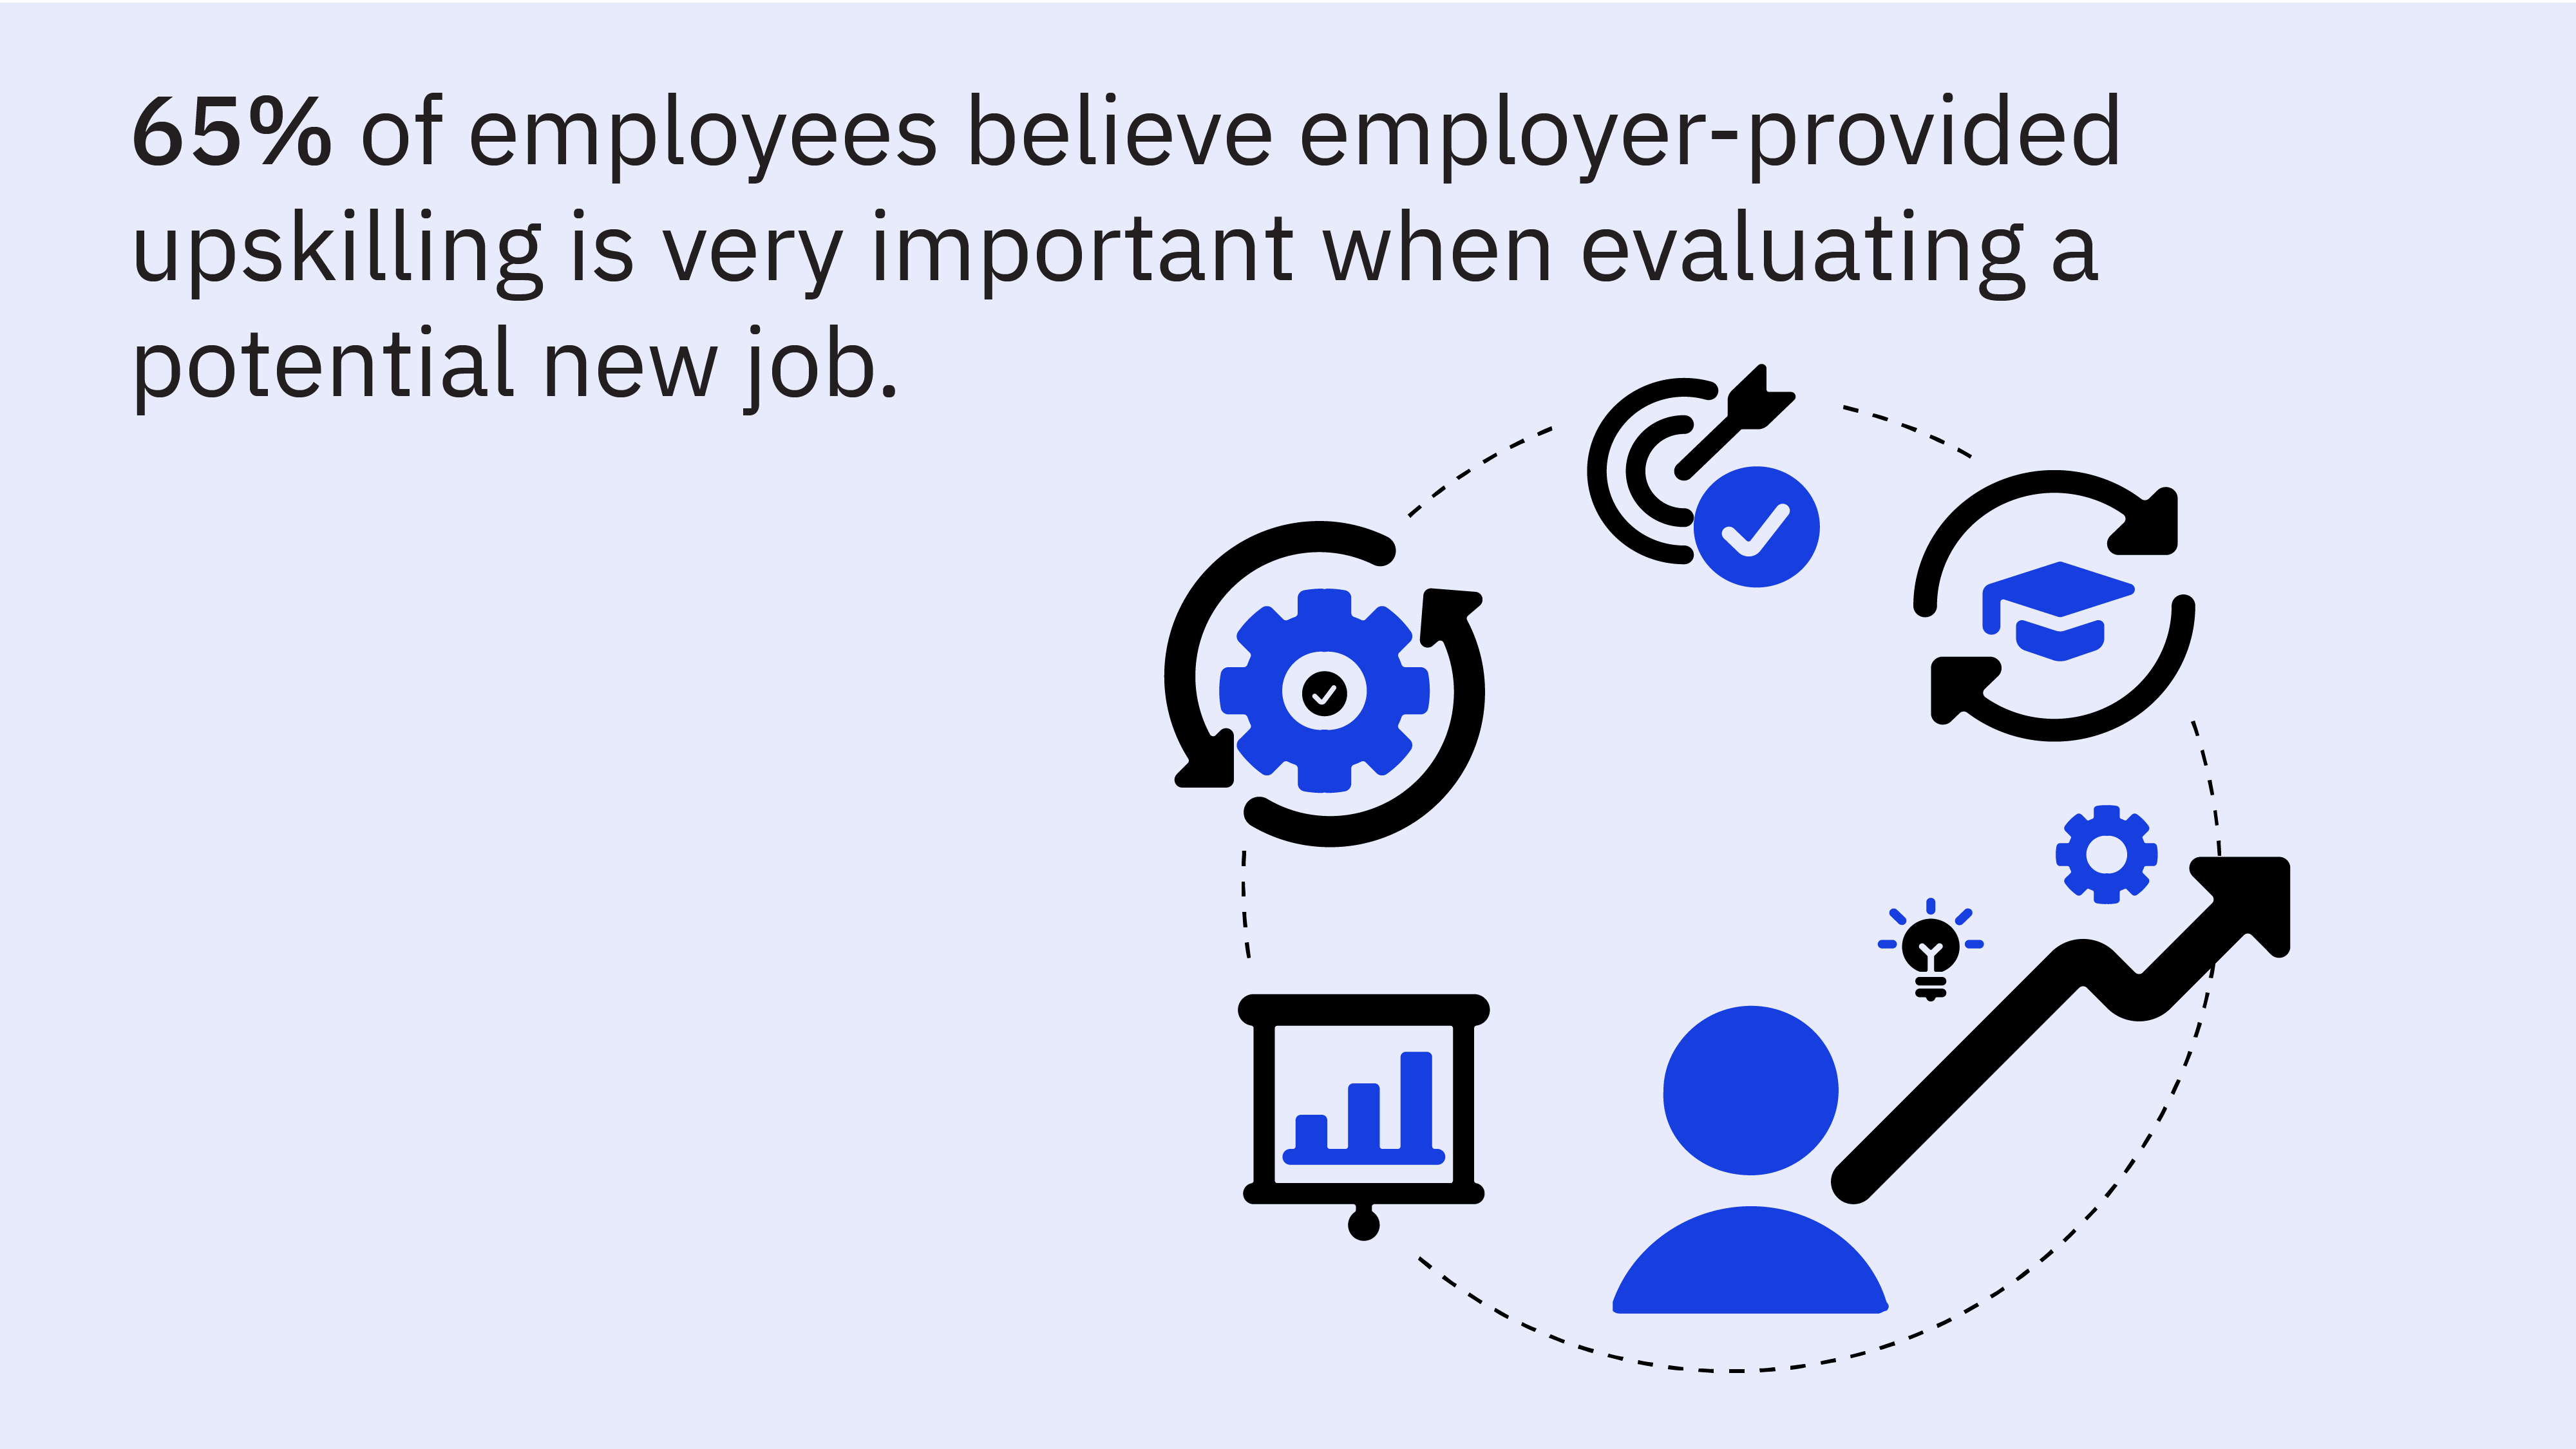 65% of employees believe upskilling is important to evaluate when seeking a new job.